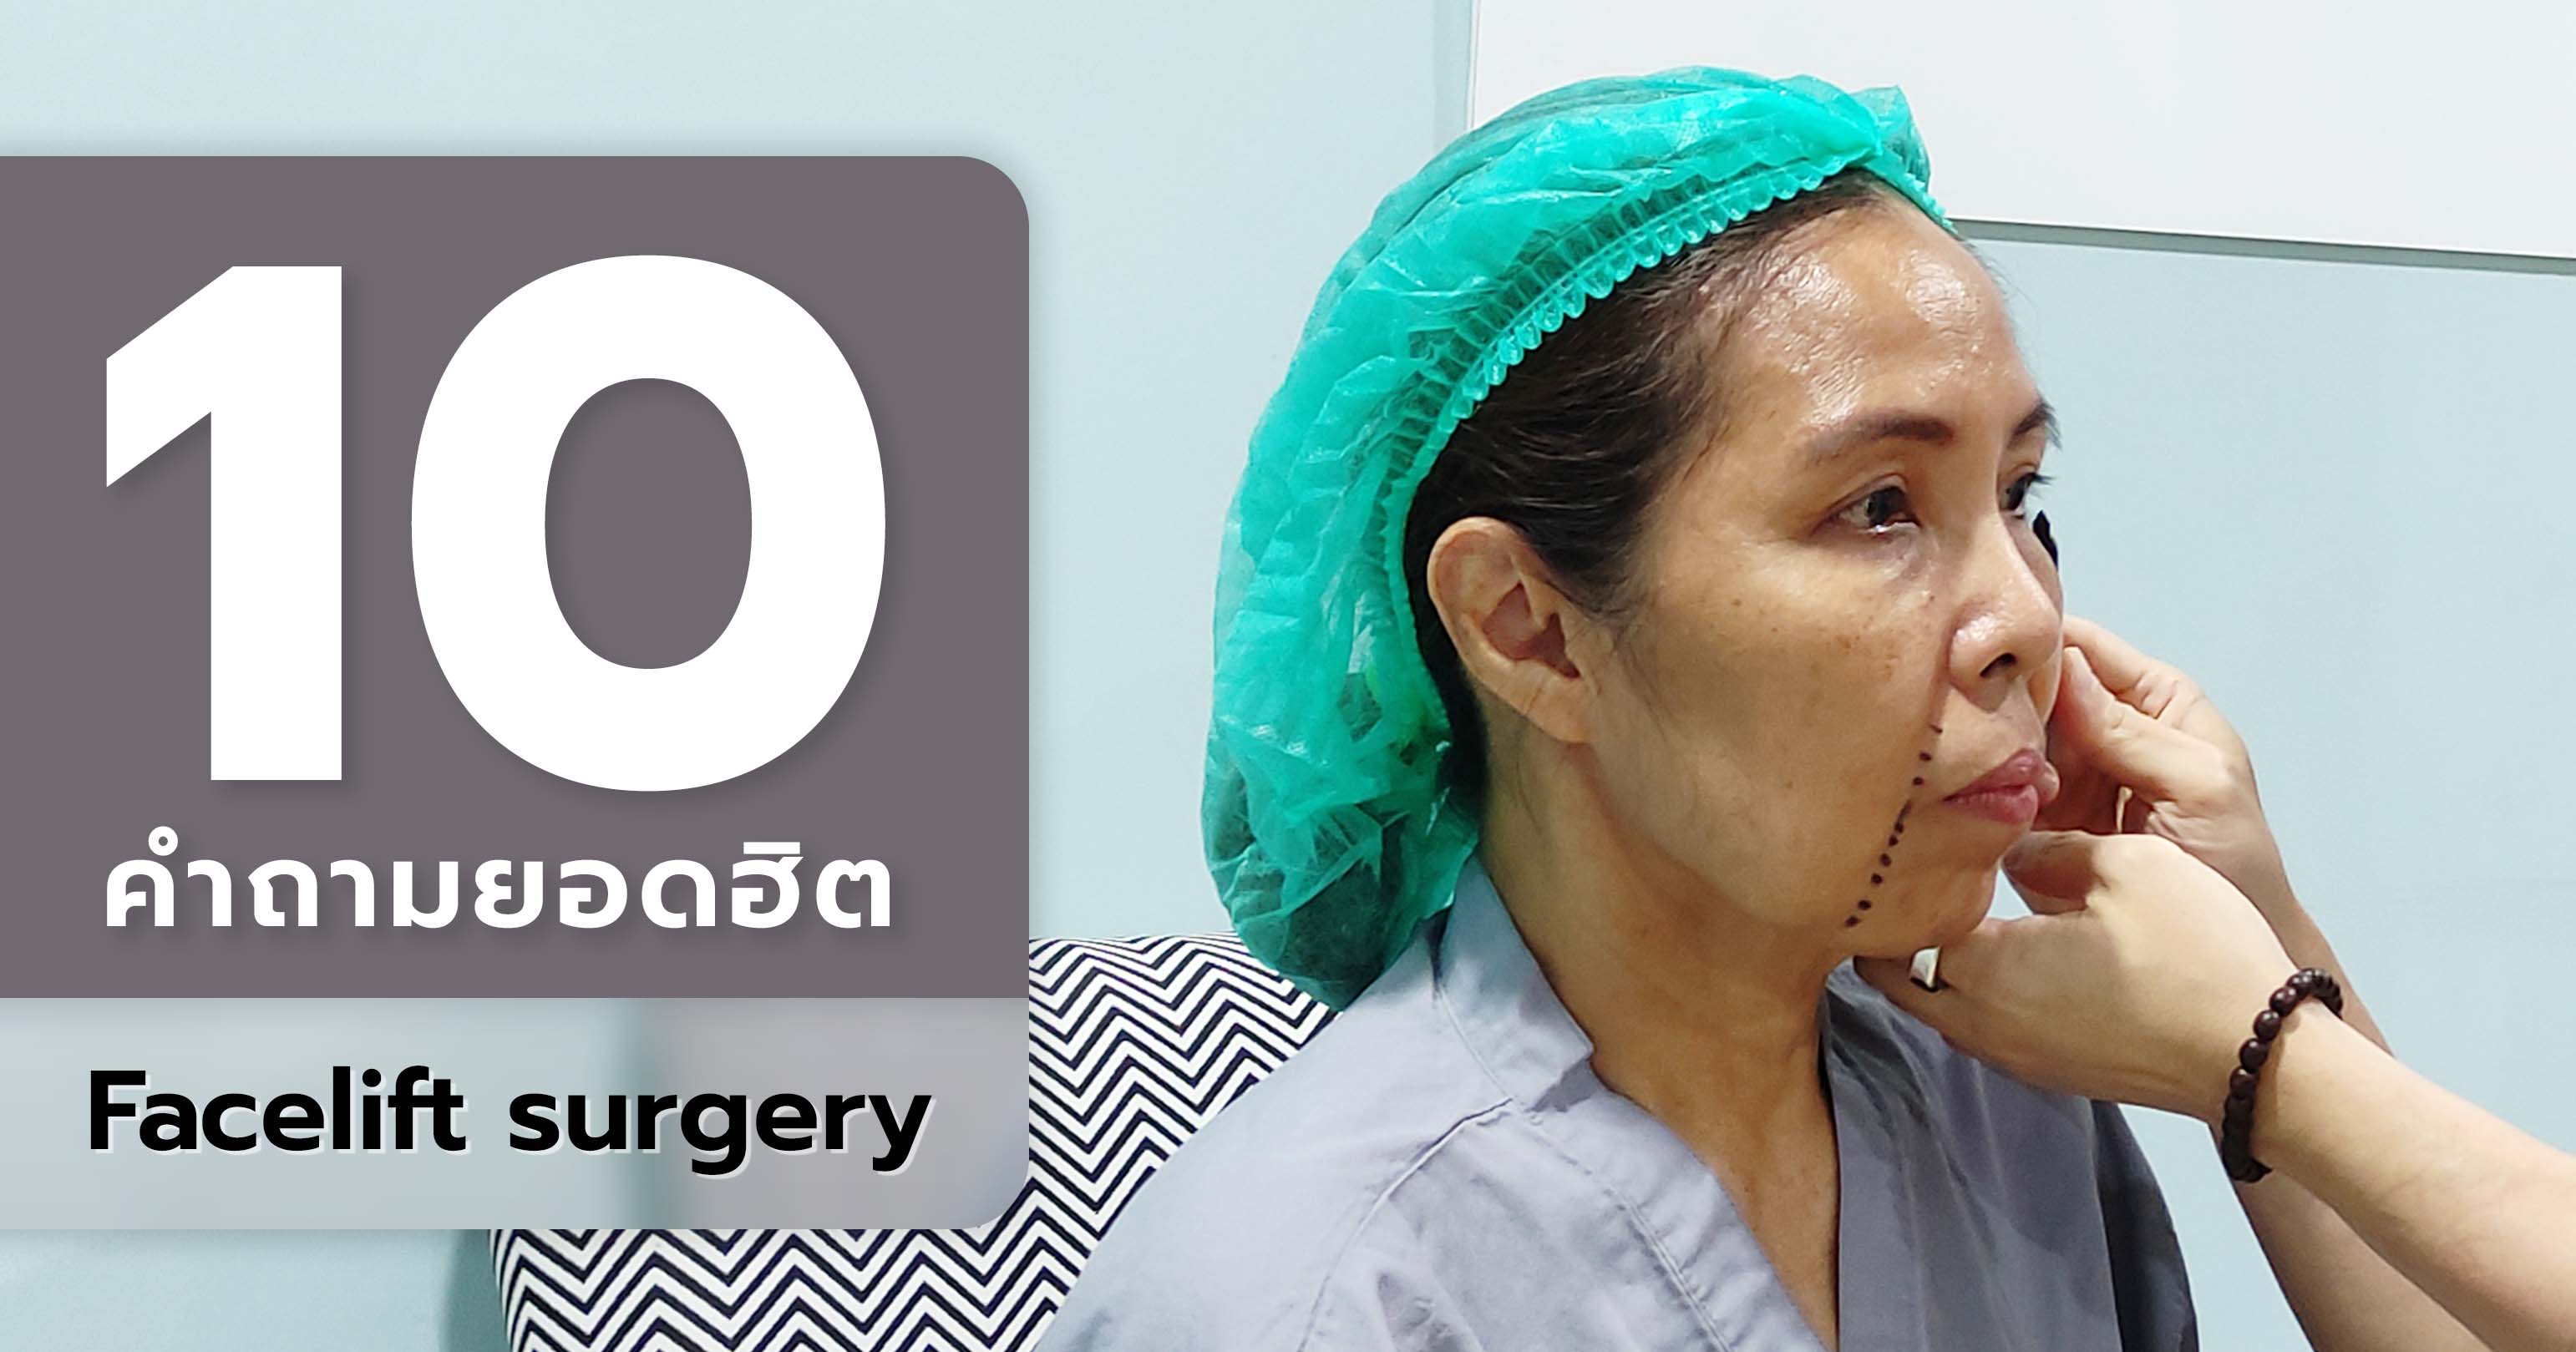 to 10 most frequently asked questions about facelift surgery